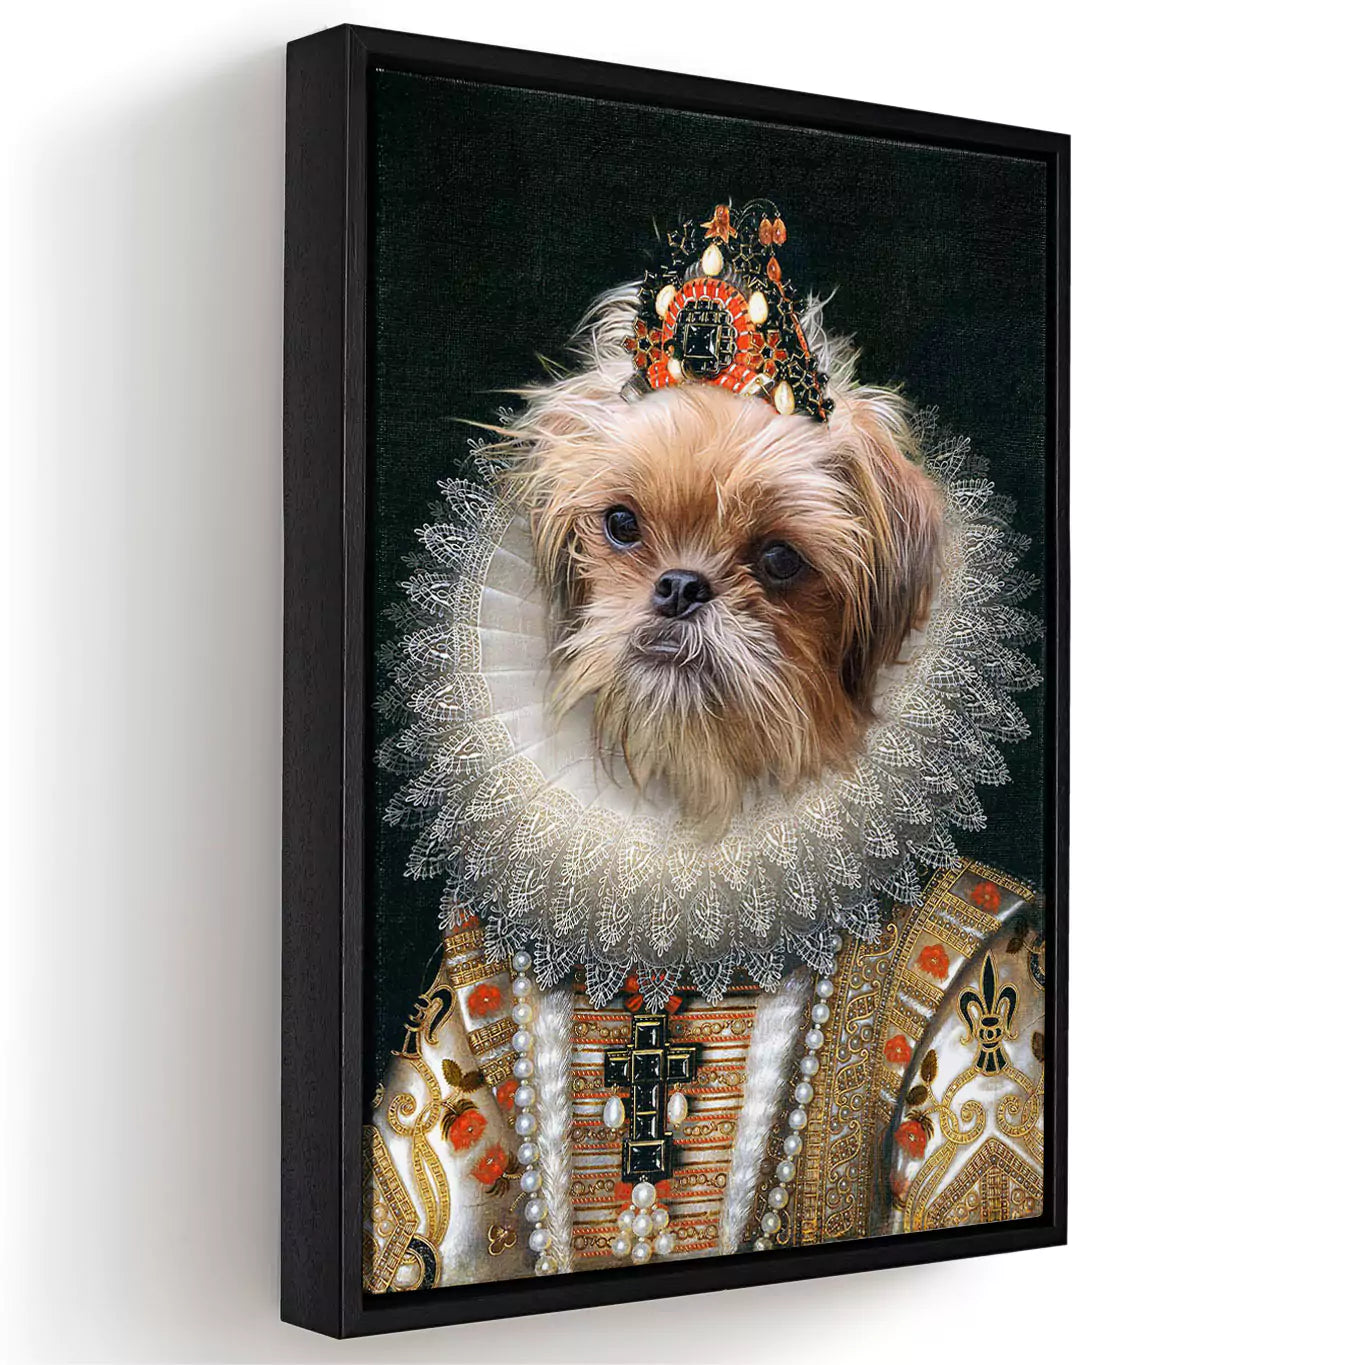 funny dog portrait, animal portraits, dog dressed as queen, dog queen canvas, dog queen print, pet portrait custom, framed canvas dog print